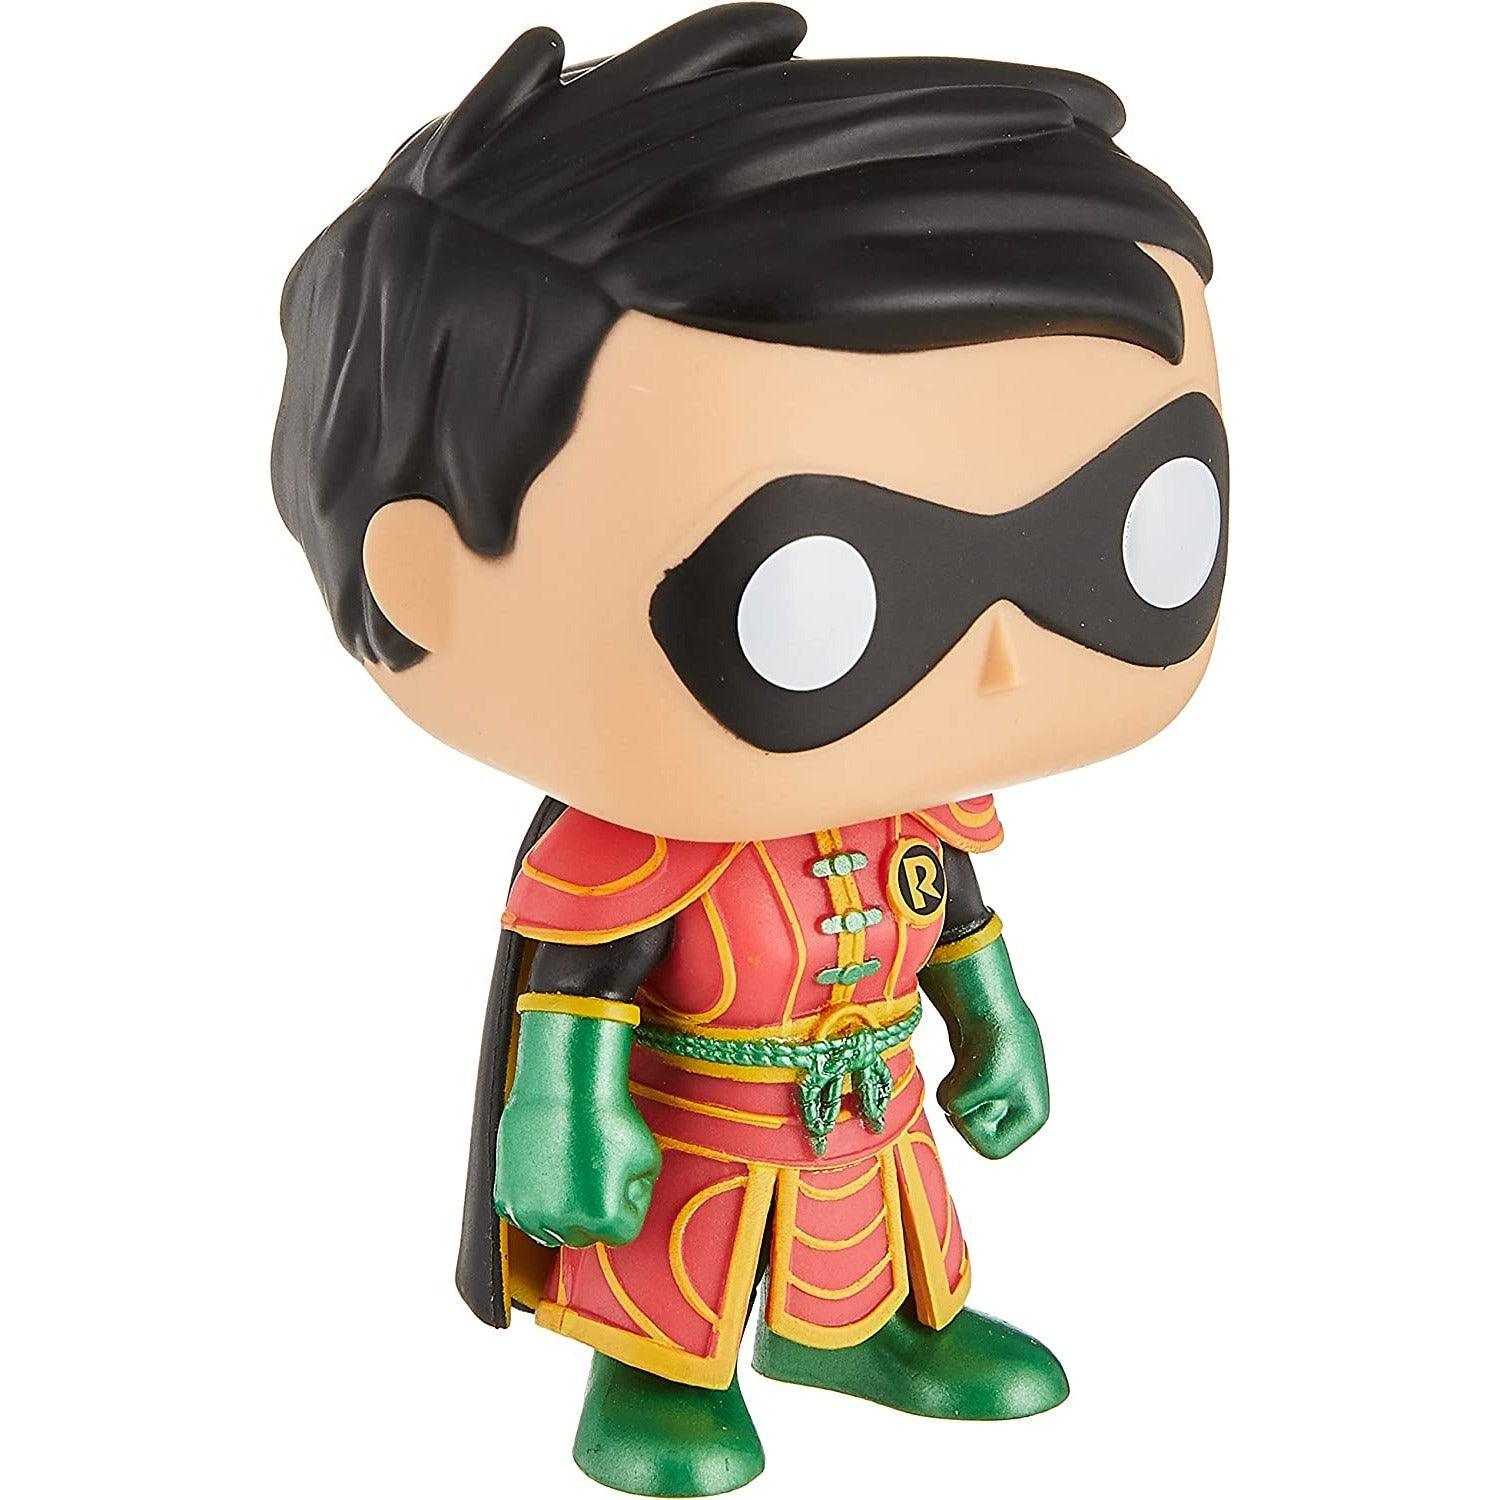 Funko Pop! DC Comic Imperial Palace Robin - BumbleToys - 18+, 4+ Years, 5-7 Years, Action Figures, Boys, Characters, Disney, Funko, Girls, Pre-Order